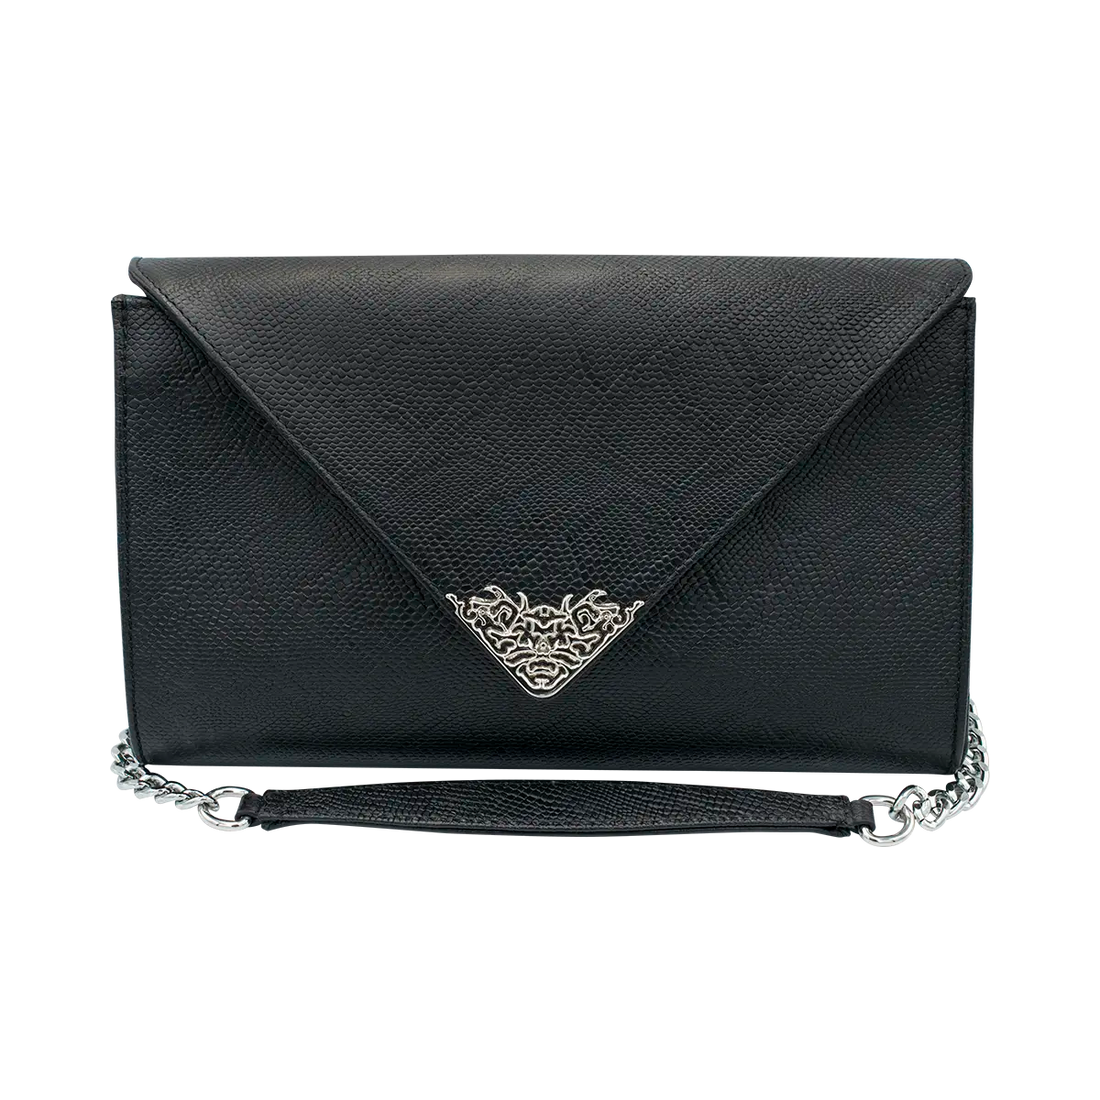 large black print leather clutch with strap. Fashion accessory for women in San Diego, CA.